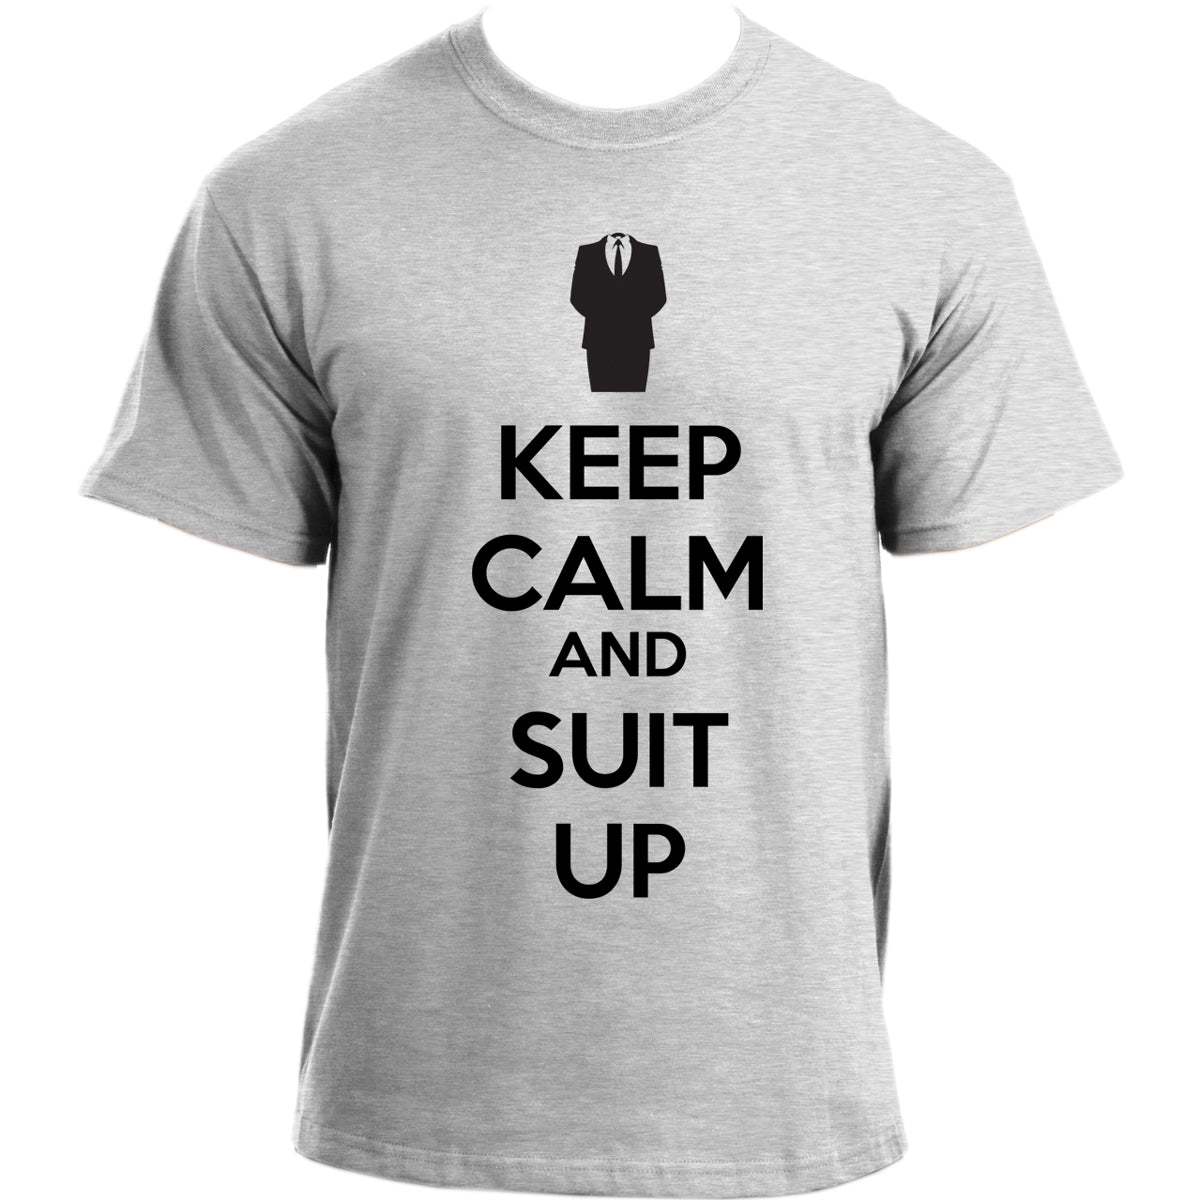 himym Keep Calm and Suit Up Barney Stinson Inspired T-shirt